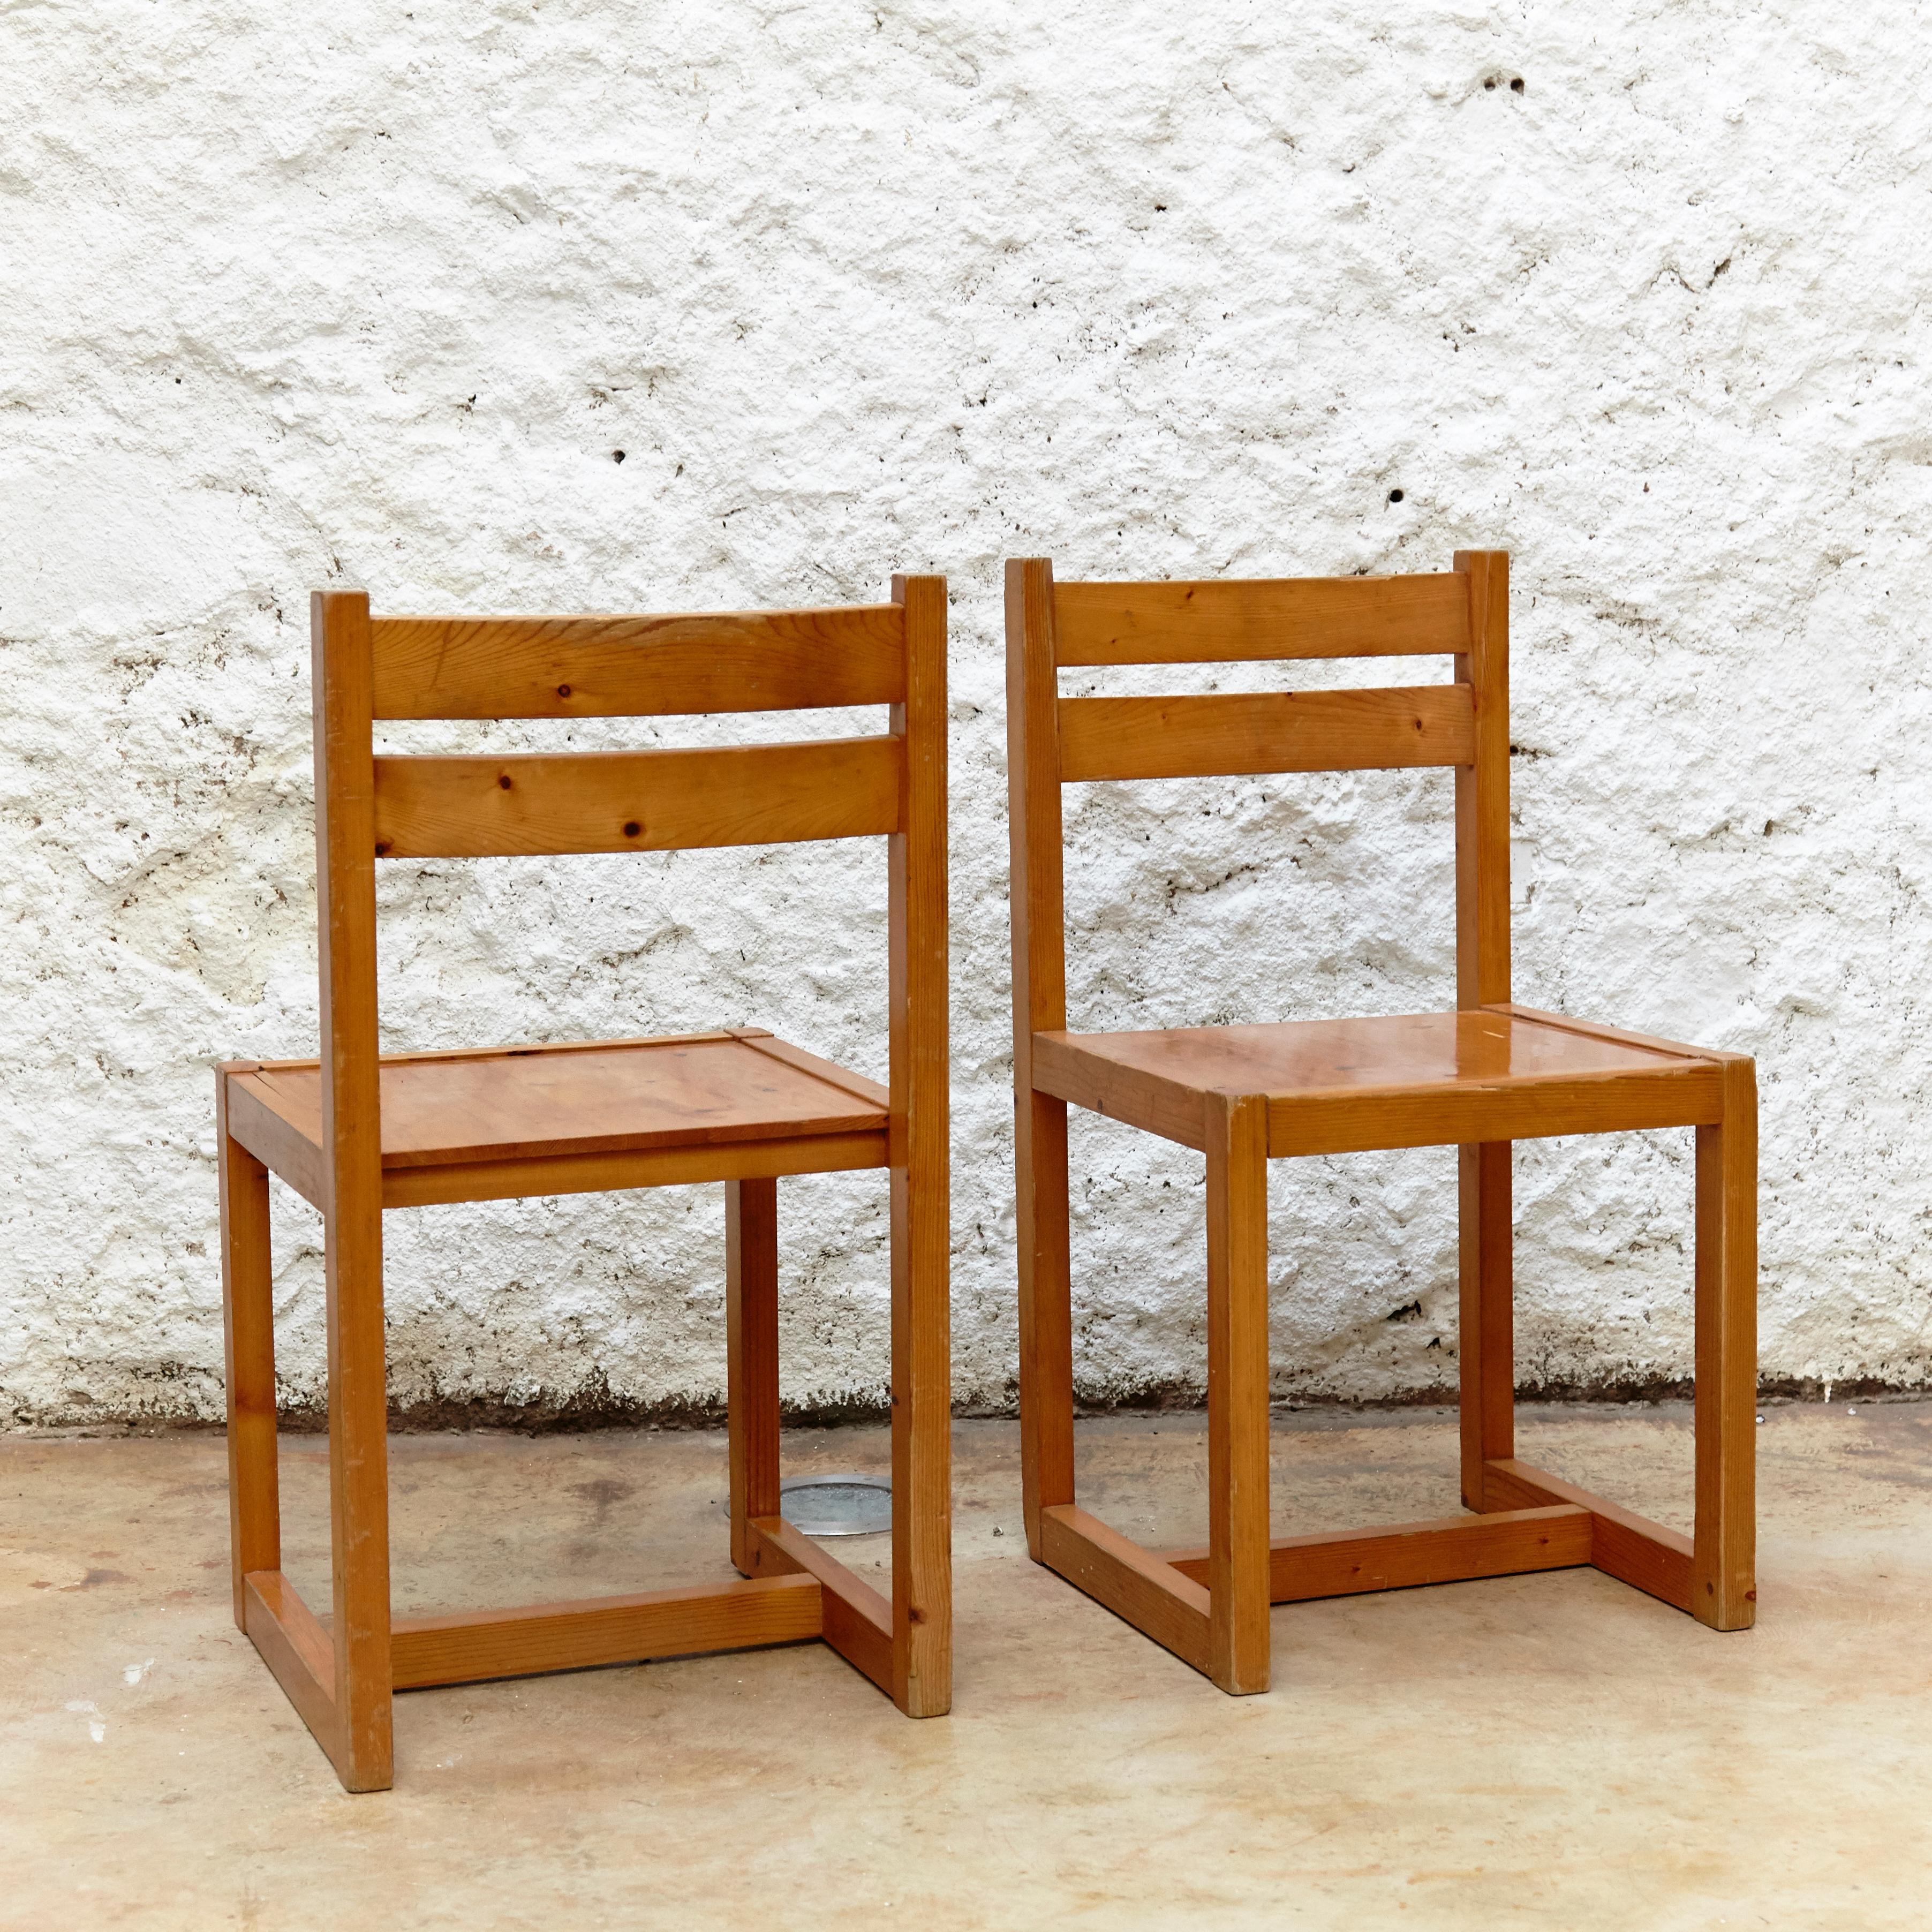 Mid-20th Century Set of Four Mid-Century Modern Racionalist Wood Chairs from France, circa 1960